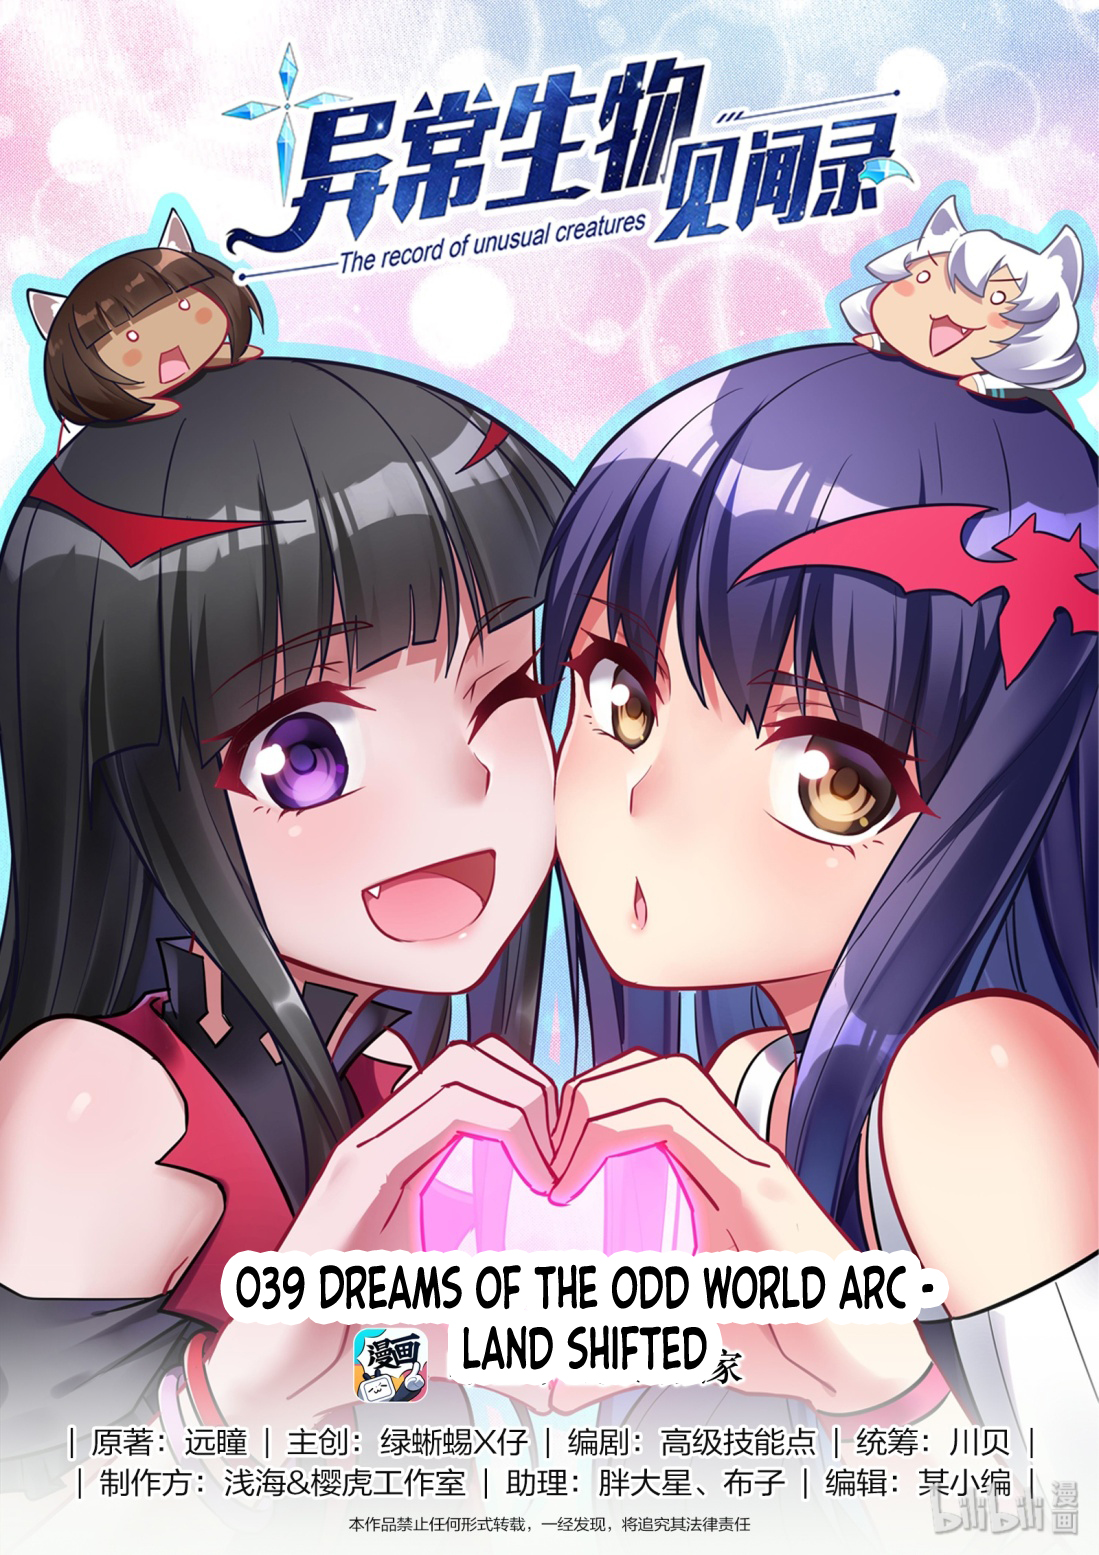 The Record of Unusual Creatures Ch. 39 Dreams of the odd world arc land shifted